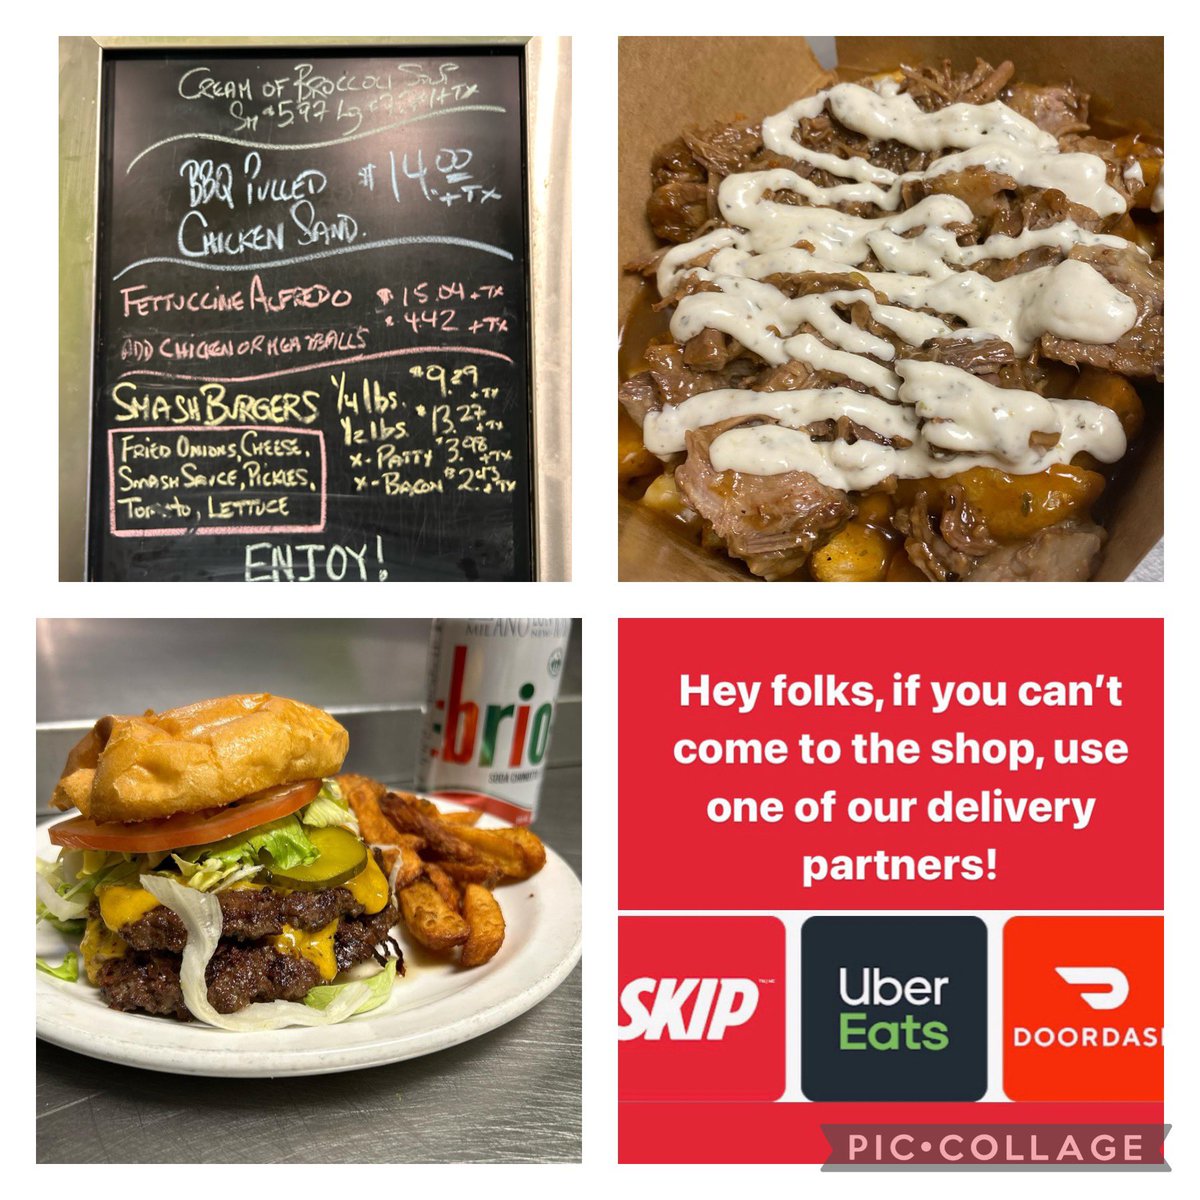 Hello Beautiful People! Come for a Smash Burger! Today’s Specials are, BBQ Pulled Chicken Sandwich. Roasted Pulled Chicken, BBQ Sauce, Topped with Cheese, Oven Baked, Chipotle Mayo and Coleslaw. Delicious Poutines, Pasta and Desserts, Enjoy! @dylanblackradio @OttawaCancer